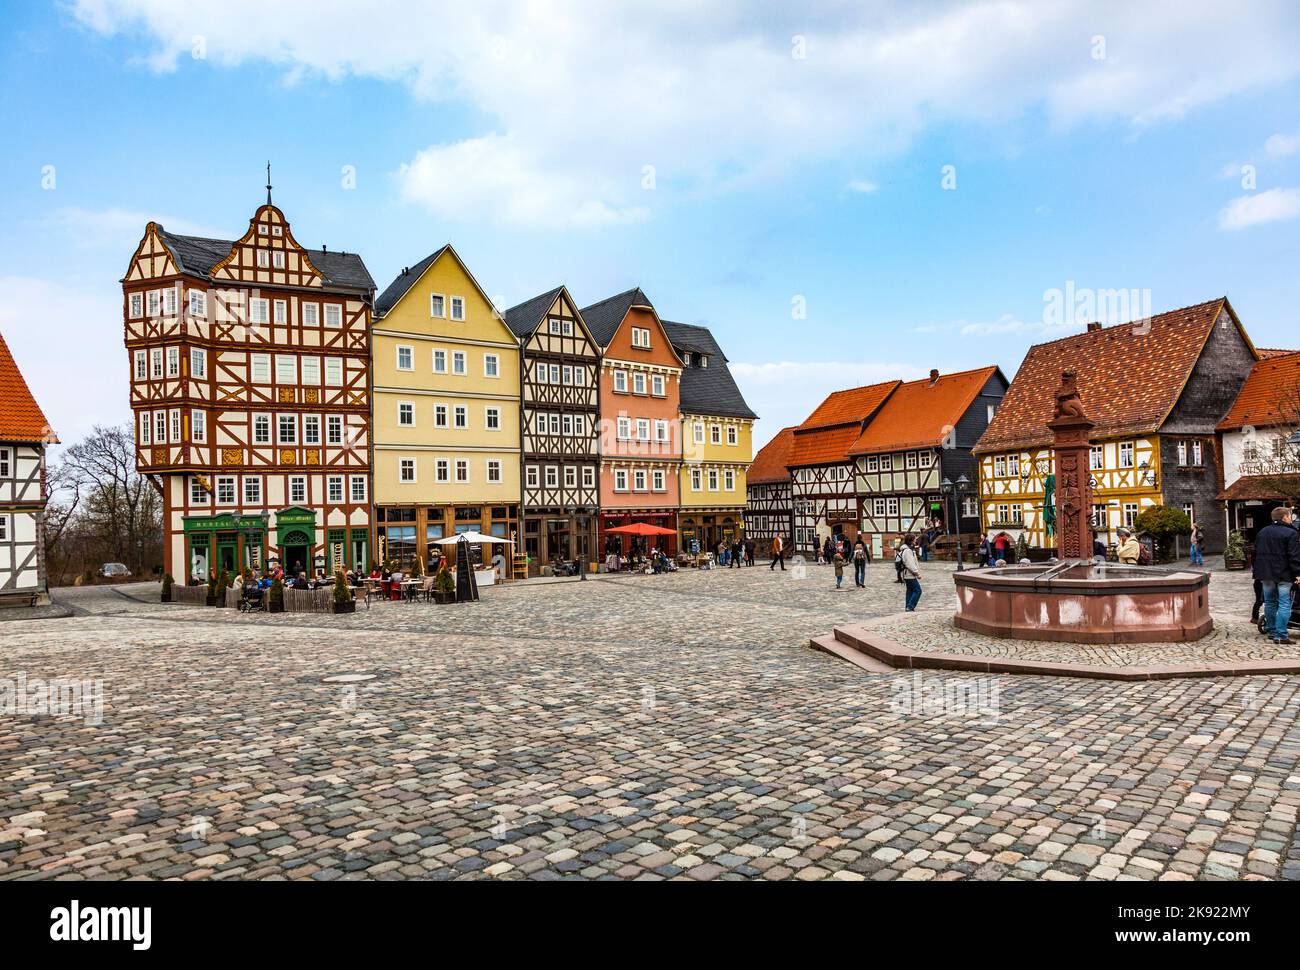 NEU ANSPACH, GERMANY - MAR 27, 2011: market place at Hessenpark in Neu Anspach. Since 1974, ca. 100 endangered buildings have been re-erected at the H Stock Photo